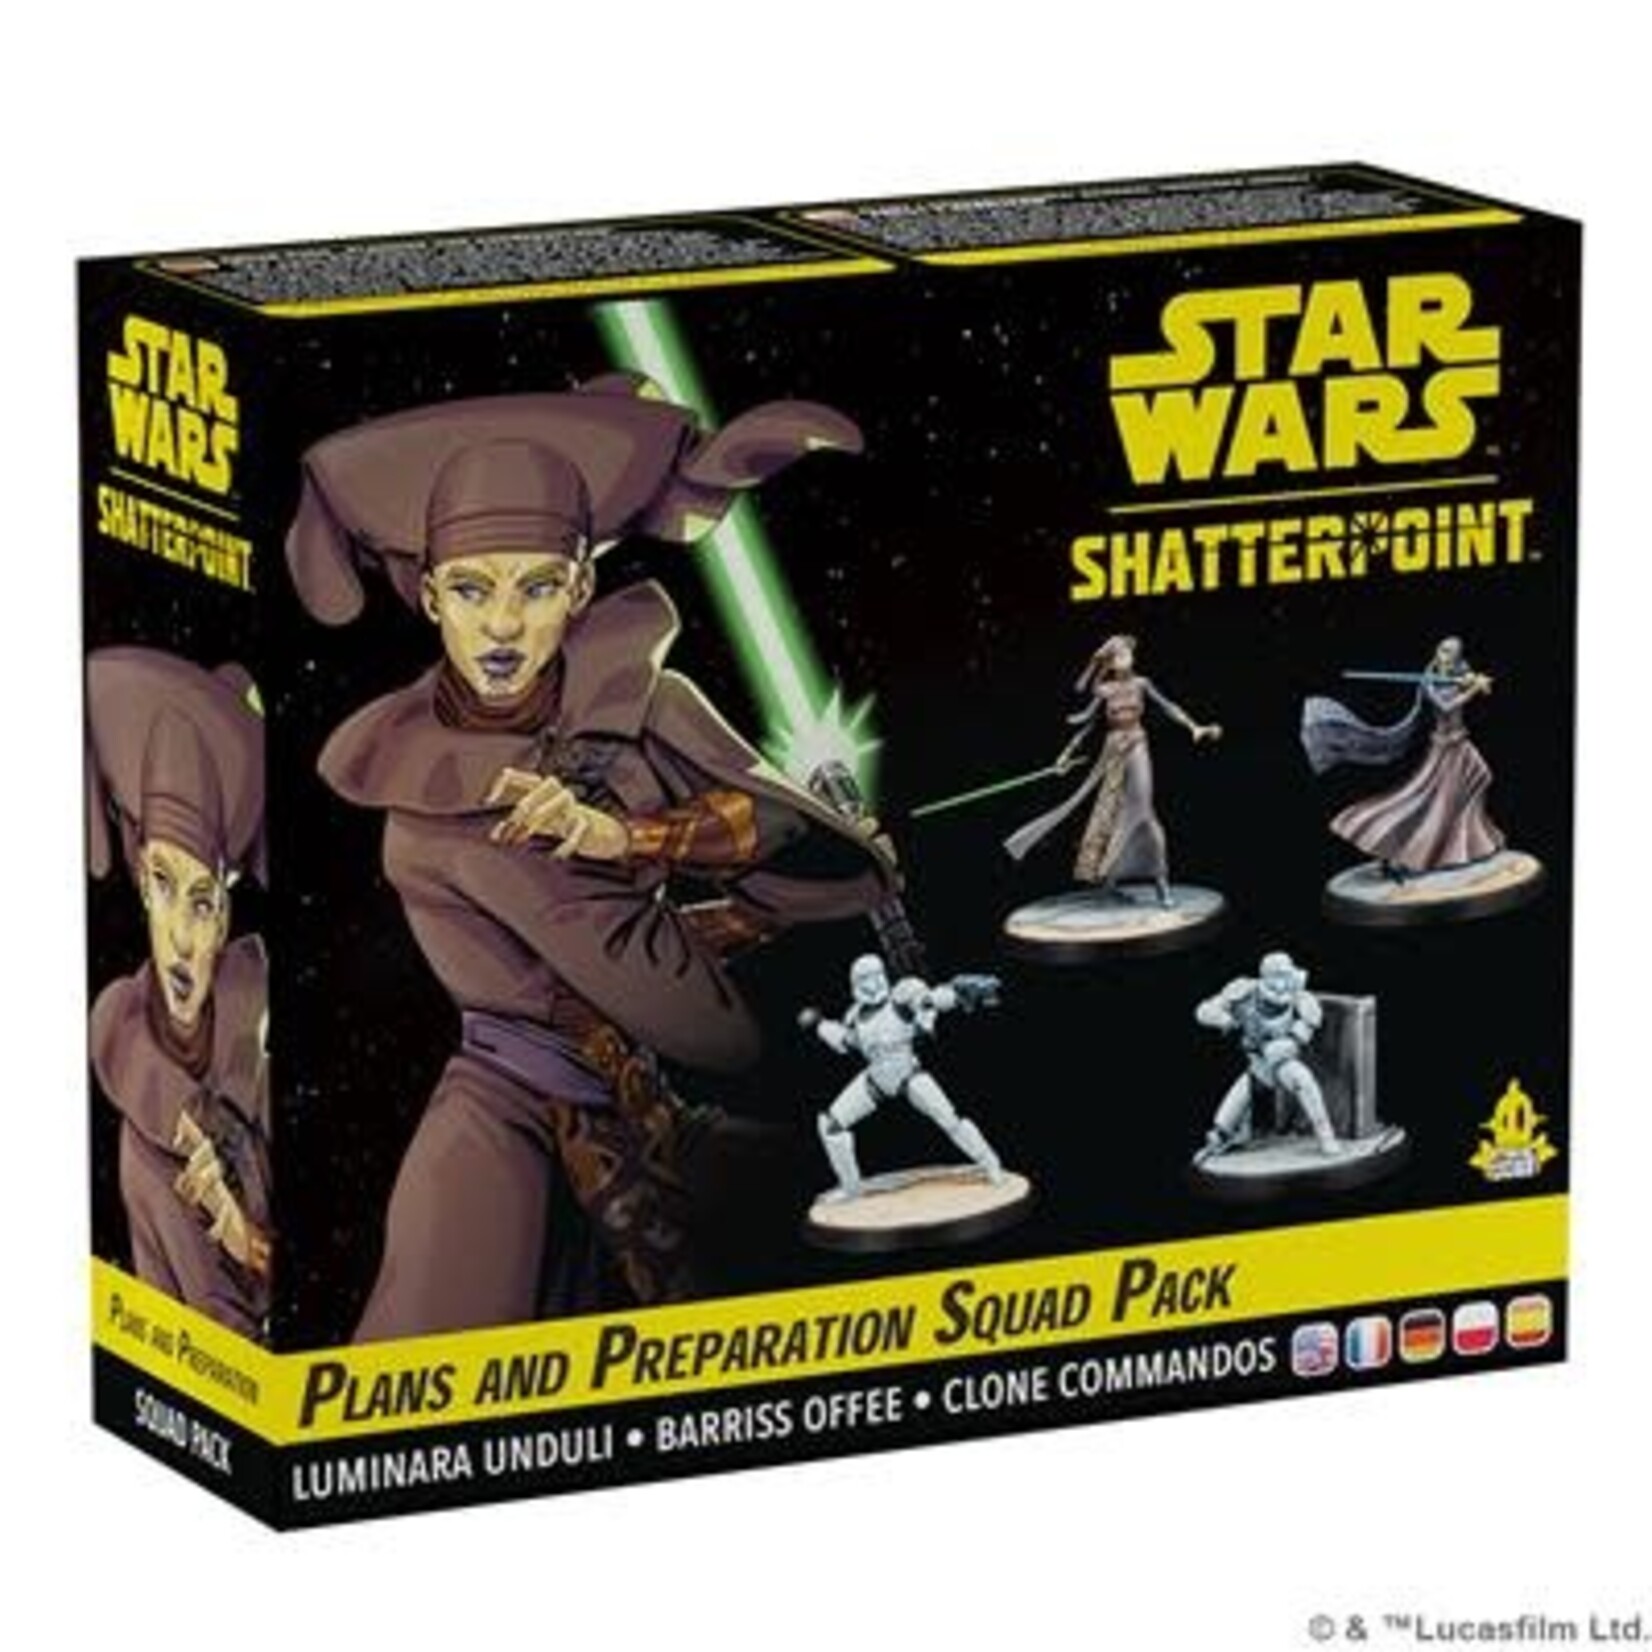 NEW Star Wars Shatterpoint -  PLANS AND PREPARATION Squad Pack